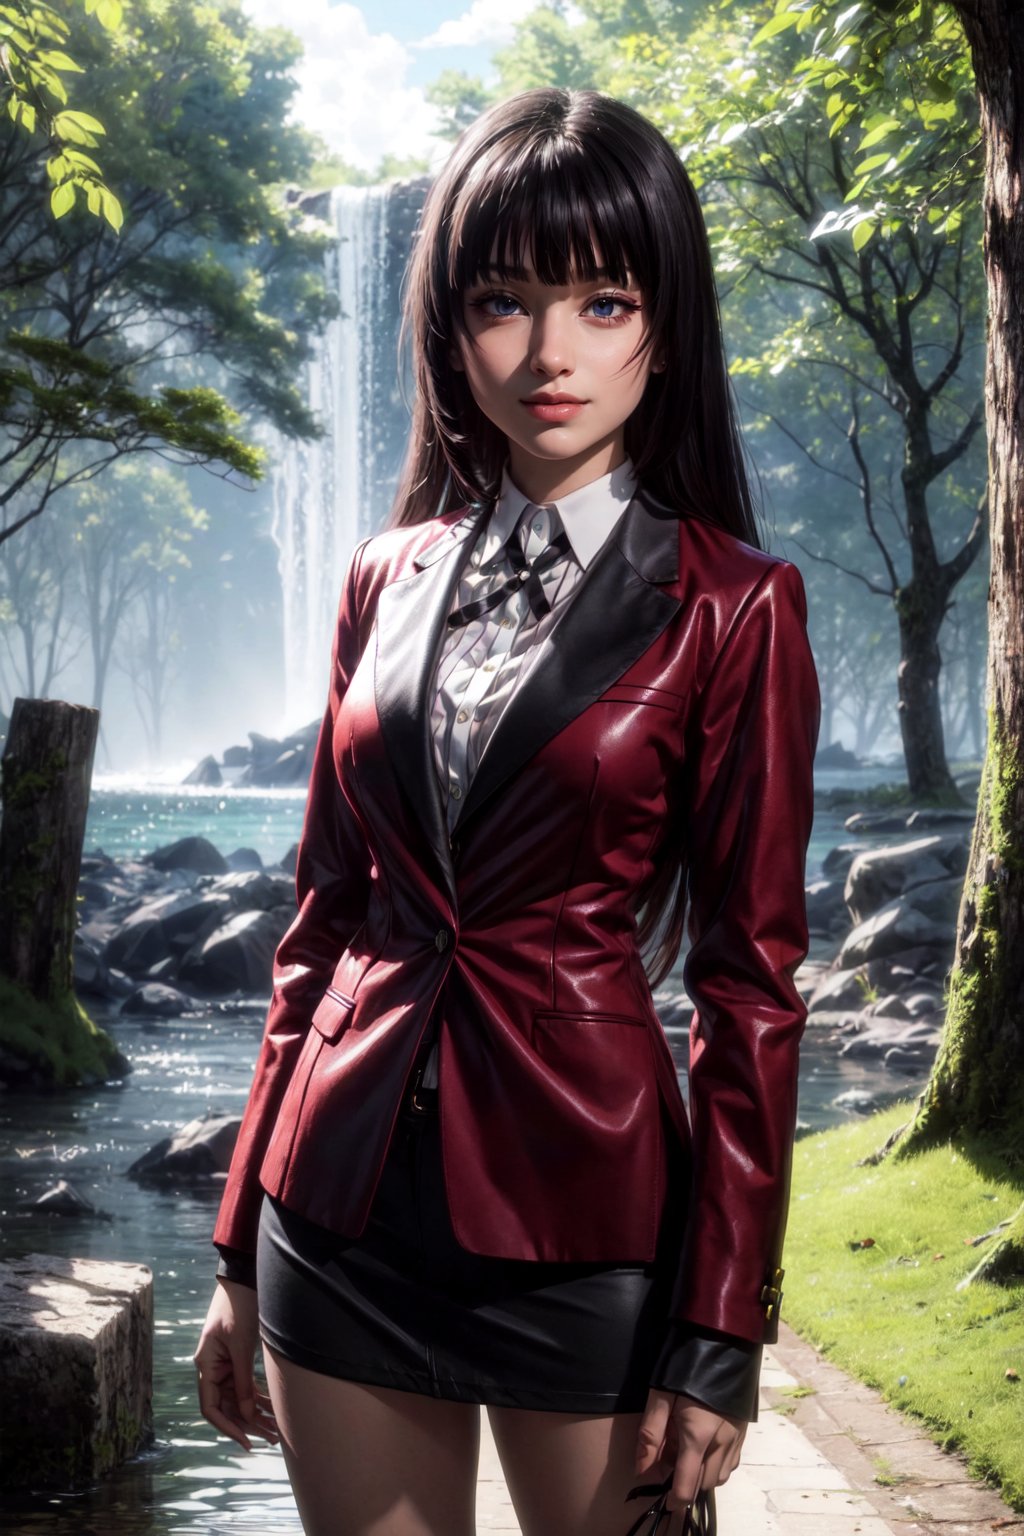 ((alone:1.5)). ((Solo:1.5)), ((MEDIUM FULL SHOT:1.5)),realistic, masterpiece,best quality,High definition, , high resolution,,A 25 years old woman, yumeko jabami, blazer, looking at viewer, smug, smile,pastelbg, outdoors, park, lake, trees, sun raytracing , long hair, brunette hair, red dress, hair movement, ((shy smile)), 